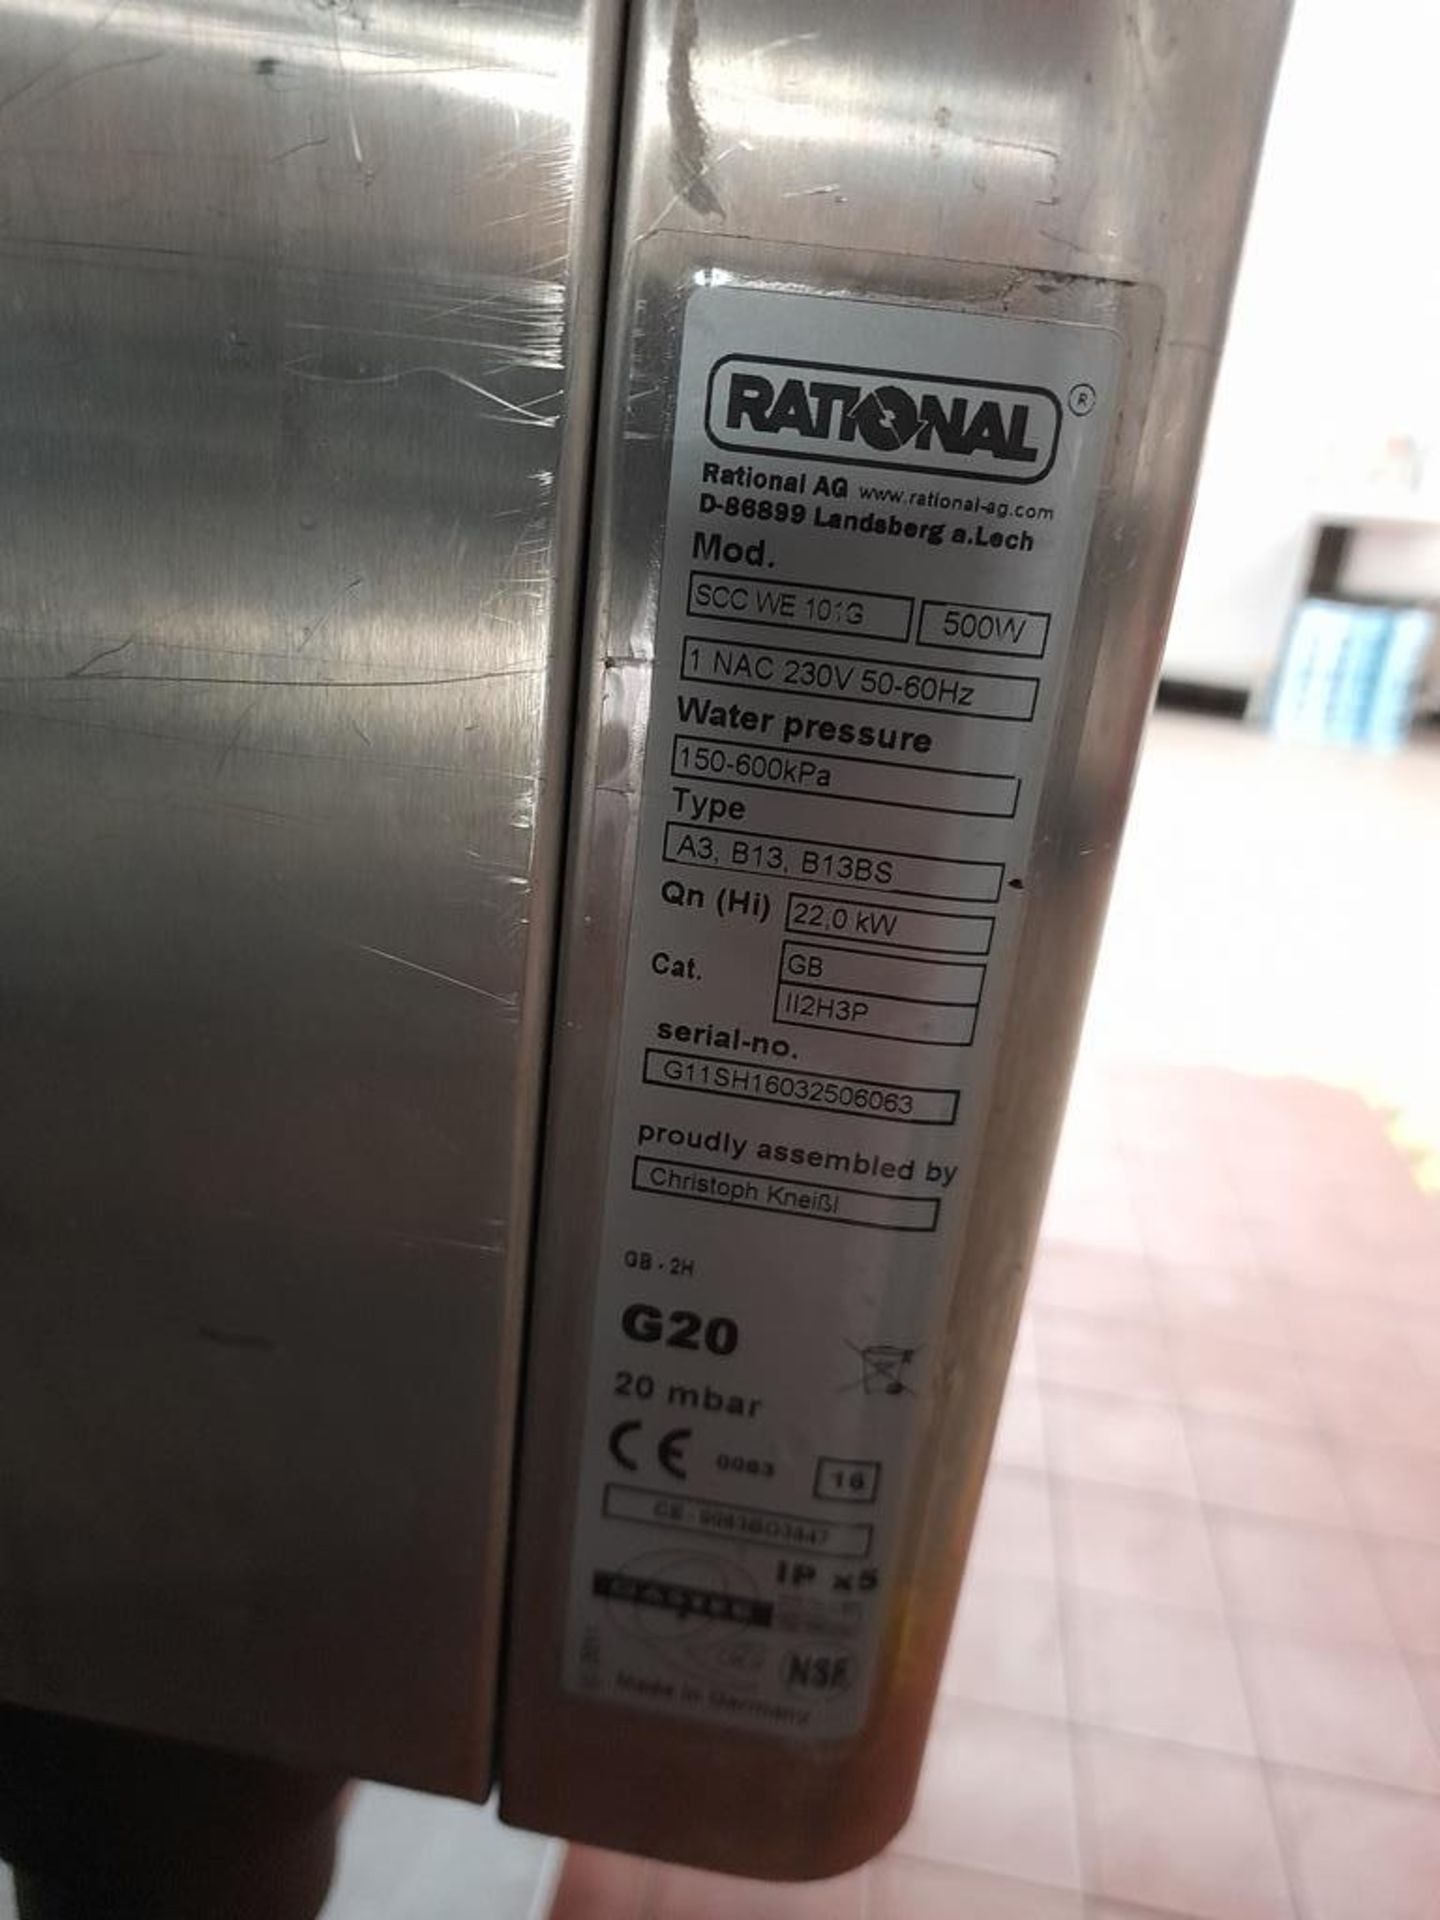 Rational SCC WEE 101G gas combination oven, s/n G11SH 16032506063, purchase date 28/02/2016. A - Image 3 of 4